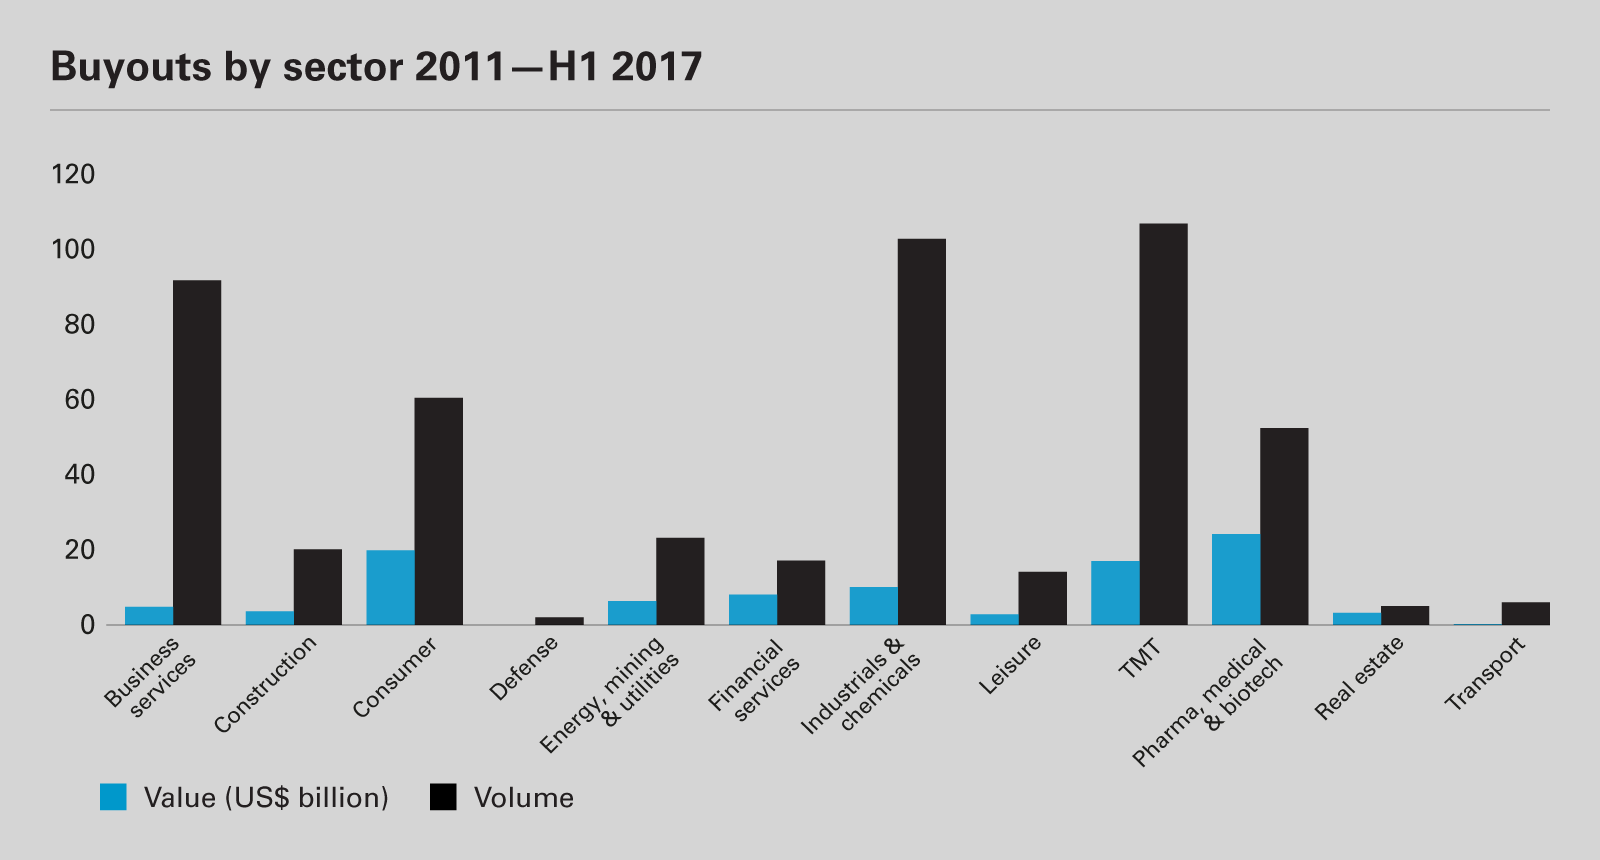 Buyouts by sector 2011 - H1 2017